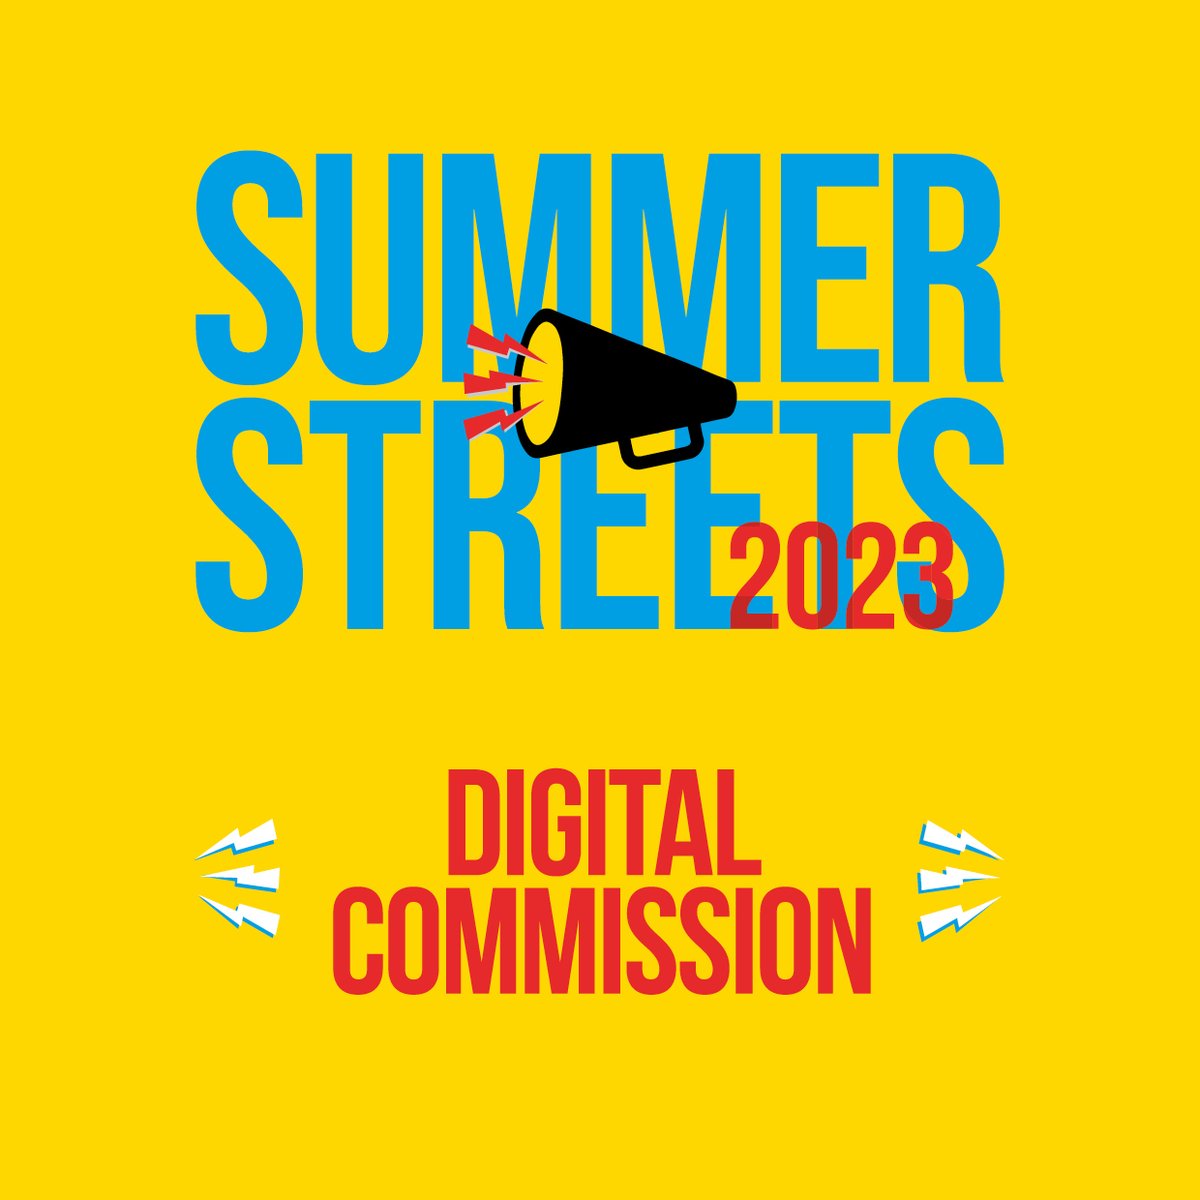 📣Artists! Today we launch our digital commission for 2023. Up to £1000 for a piece of digital work that will accompany this year's Summer Streets programme. More info here: summerstreetsfestival.com/getinvolved